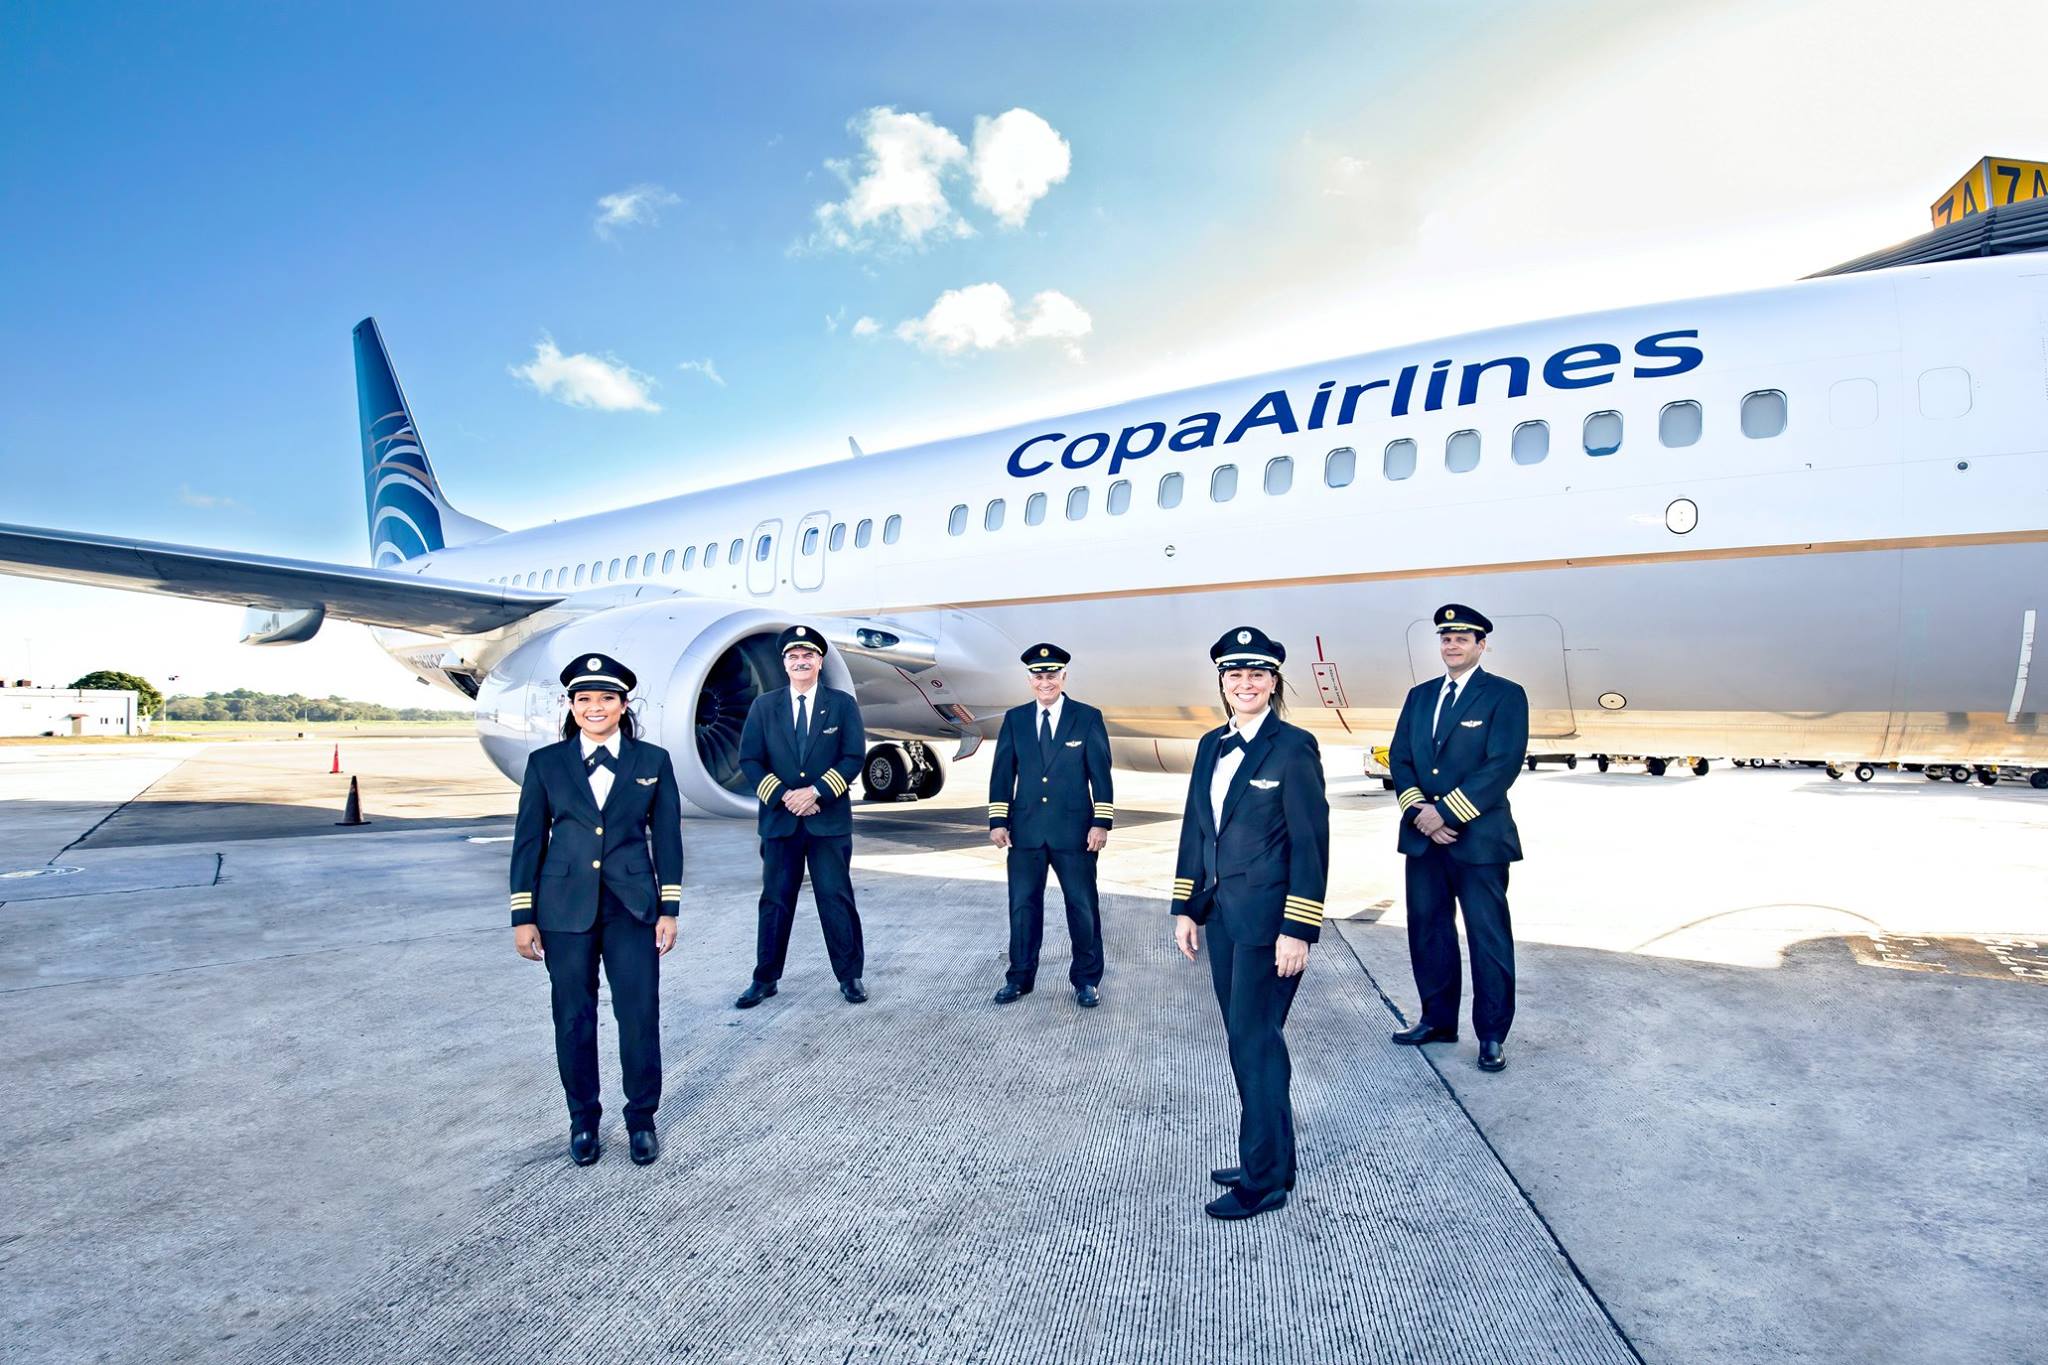 Copa Airlines - Air Travel Analysis